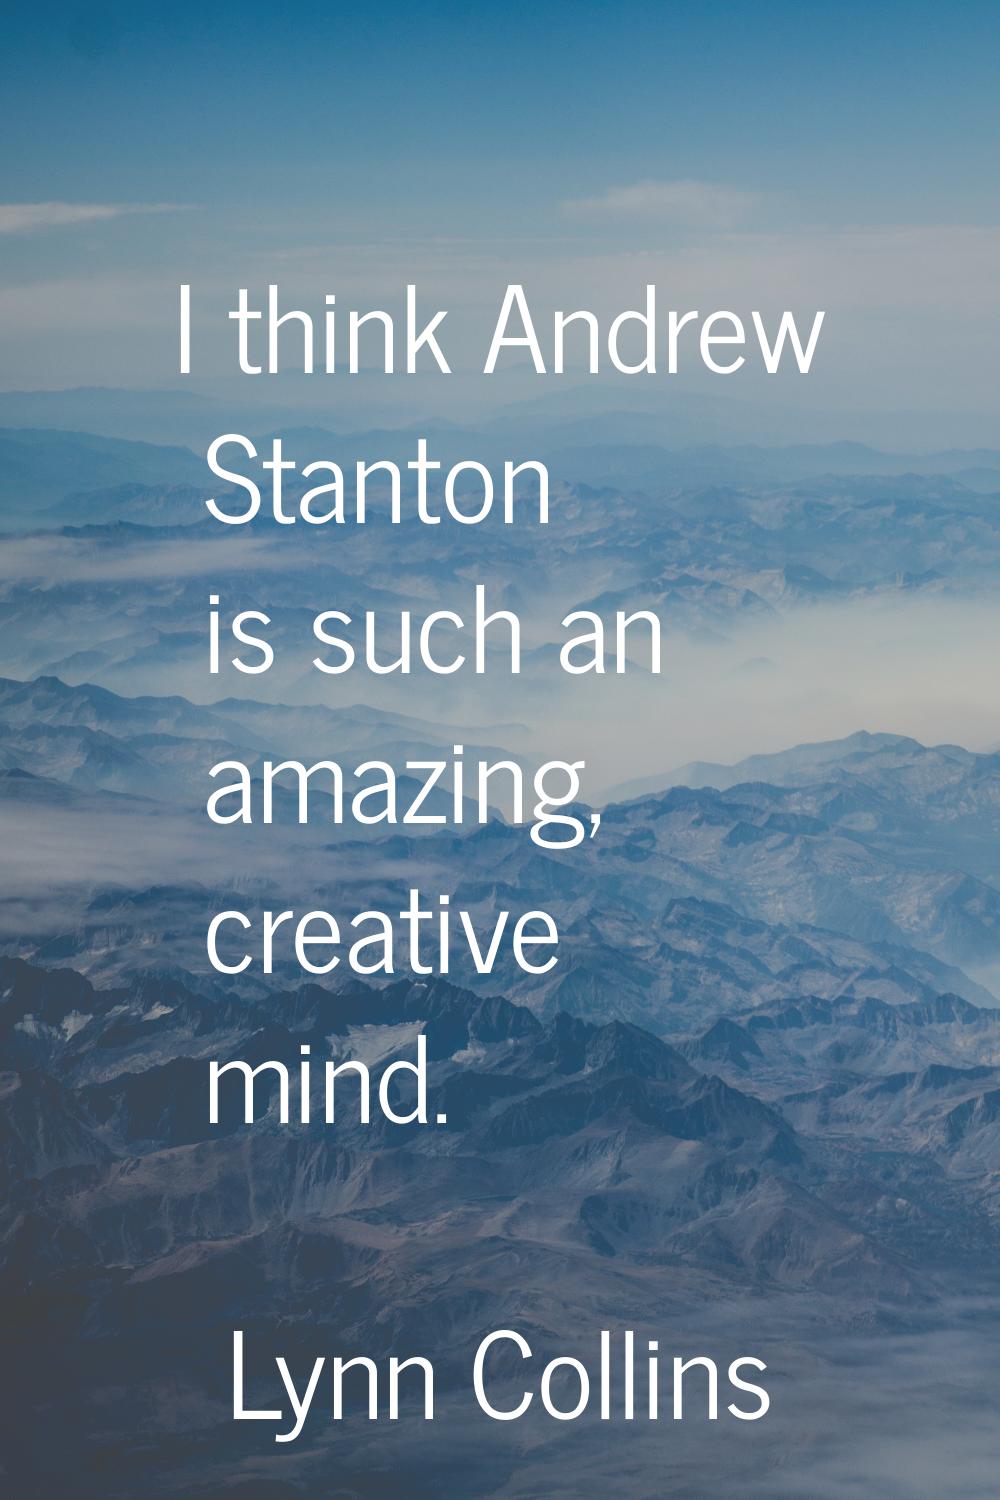 I think Andrew Stanton is such an amazing, creative mind.